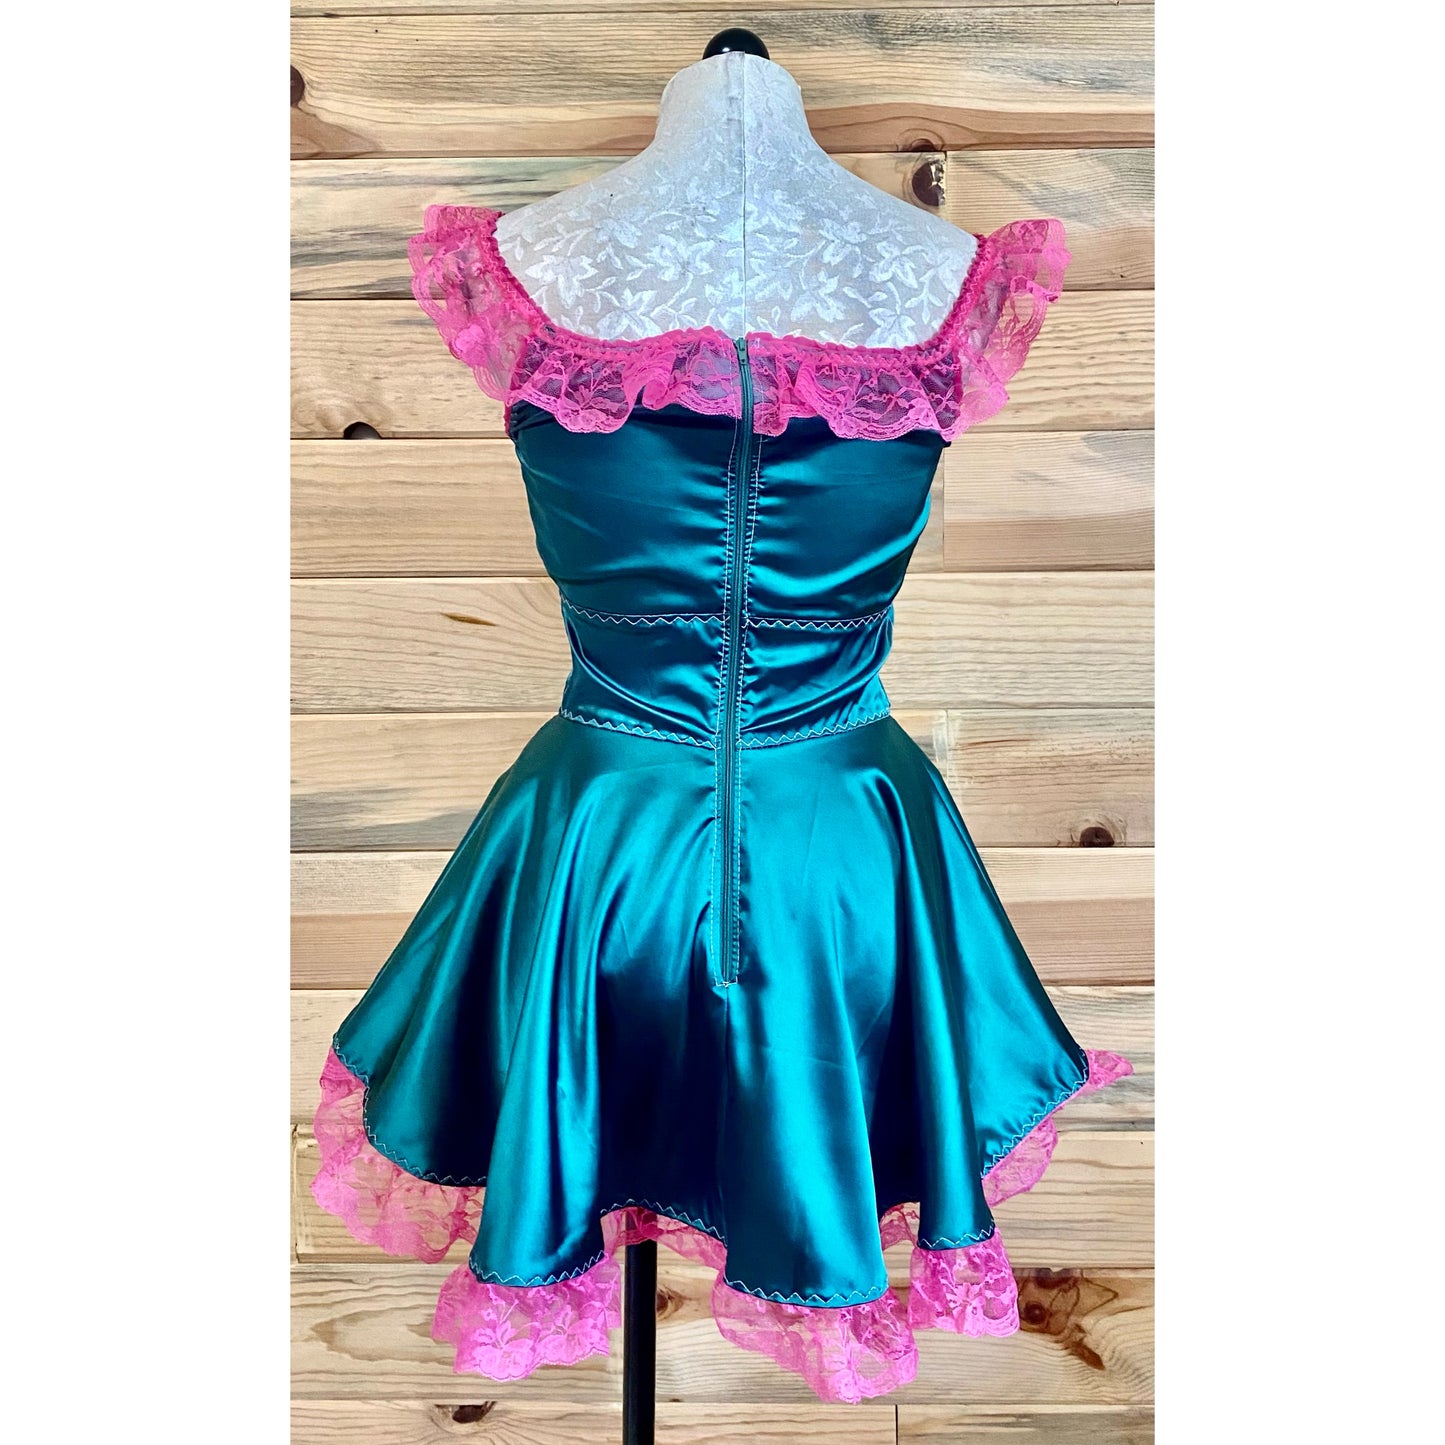 The Kathryn Dress in Teal with Fuchsia Lace